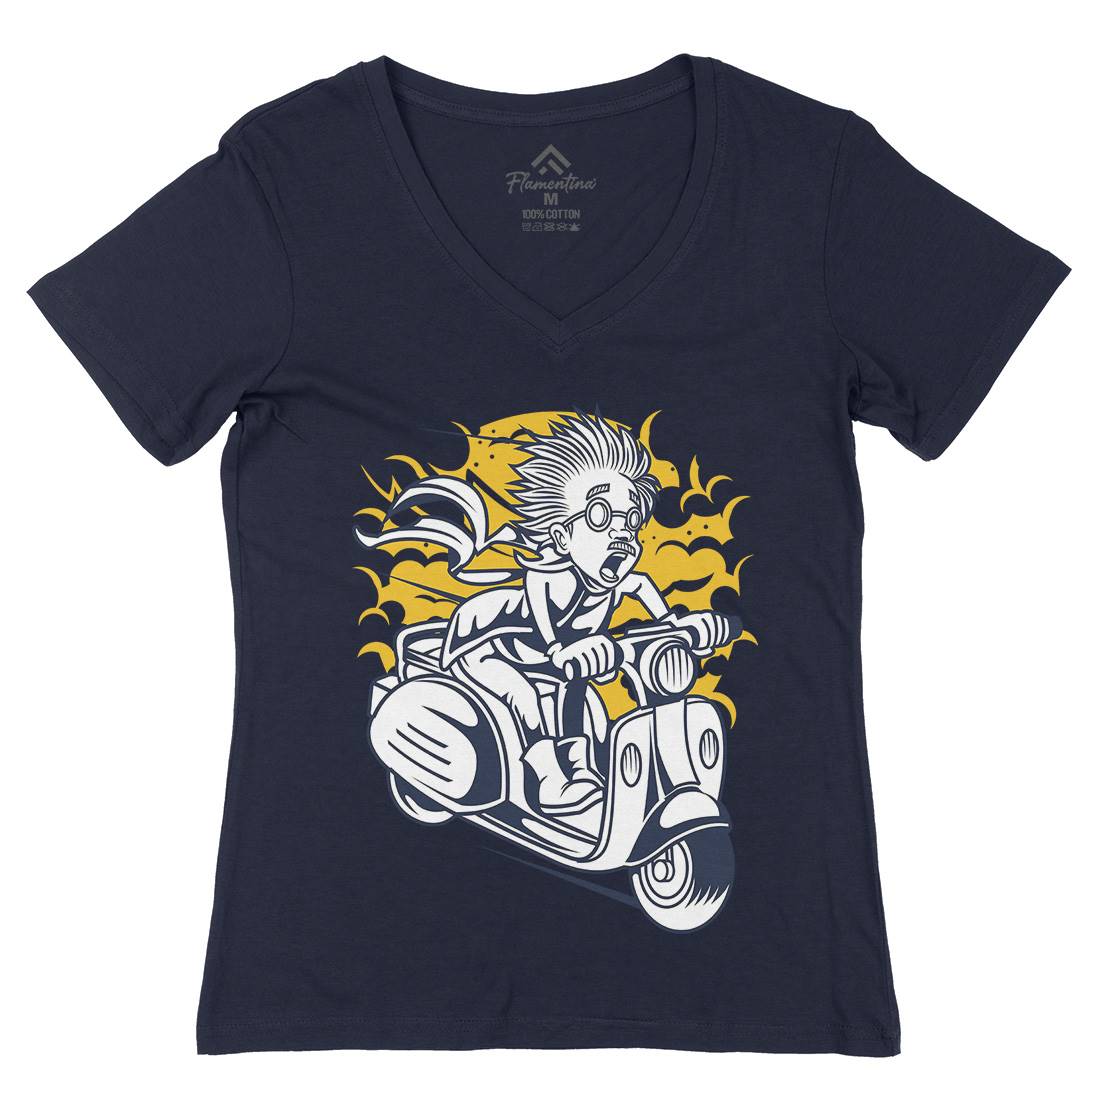 Mad Scientist Scooter Womens Organic V-Neck T-Shirt Work C391